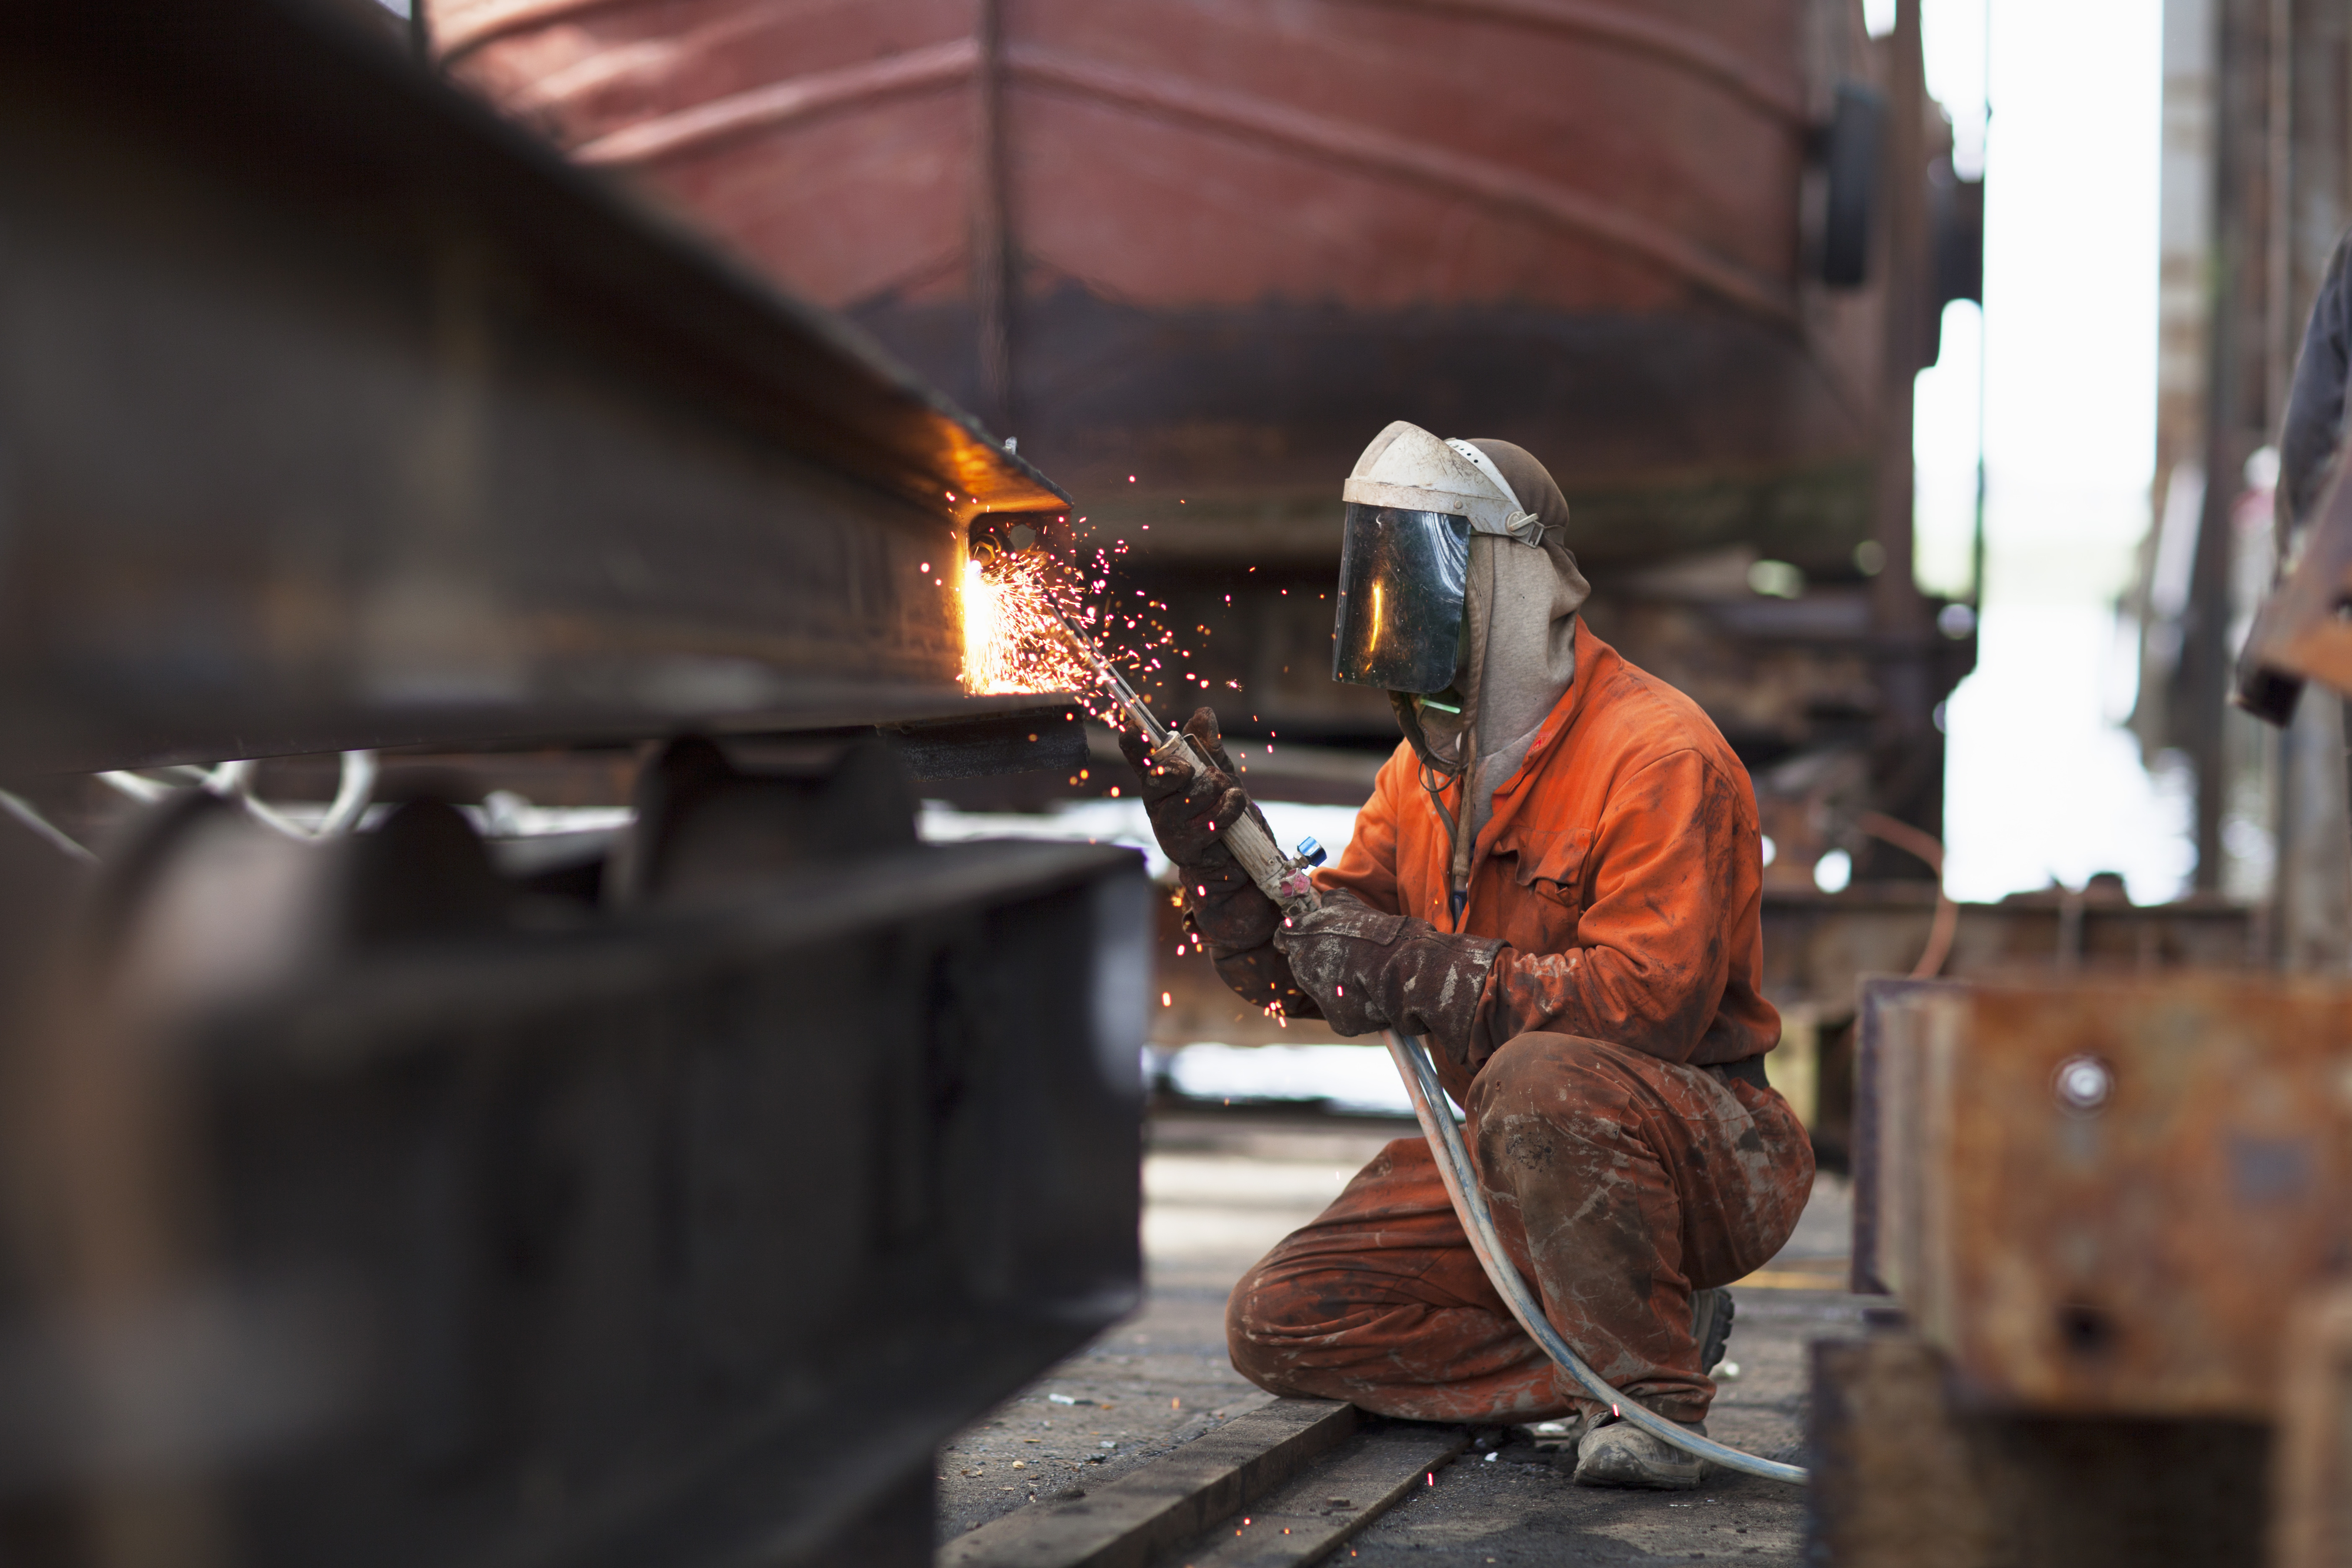 welder working on a project wearing a mask over their face for protection